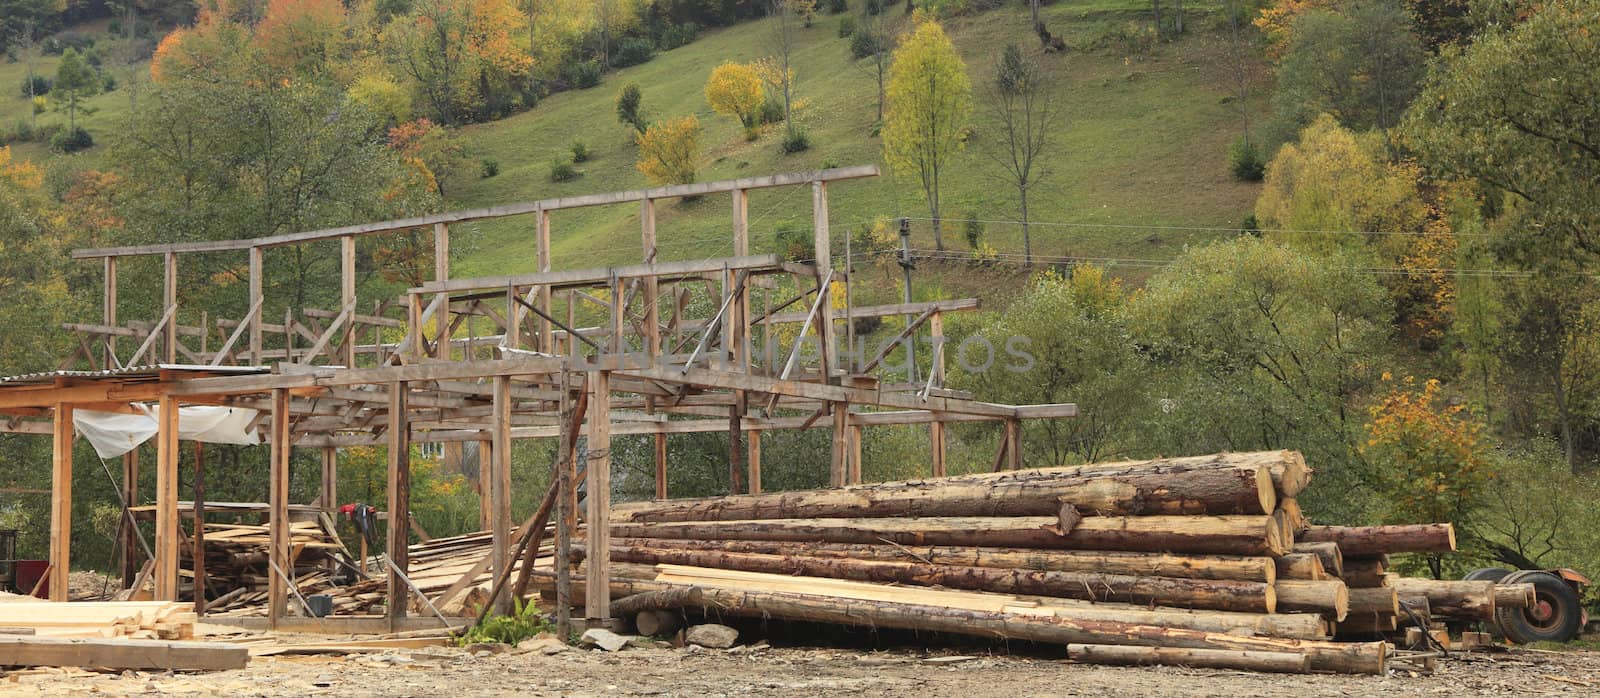 Image of a timber production place in a forested region.